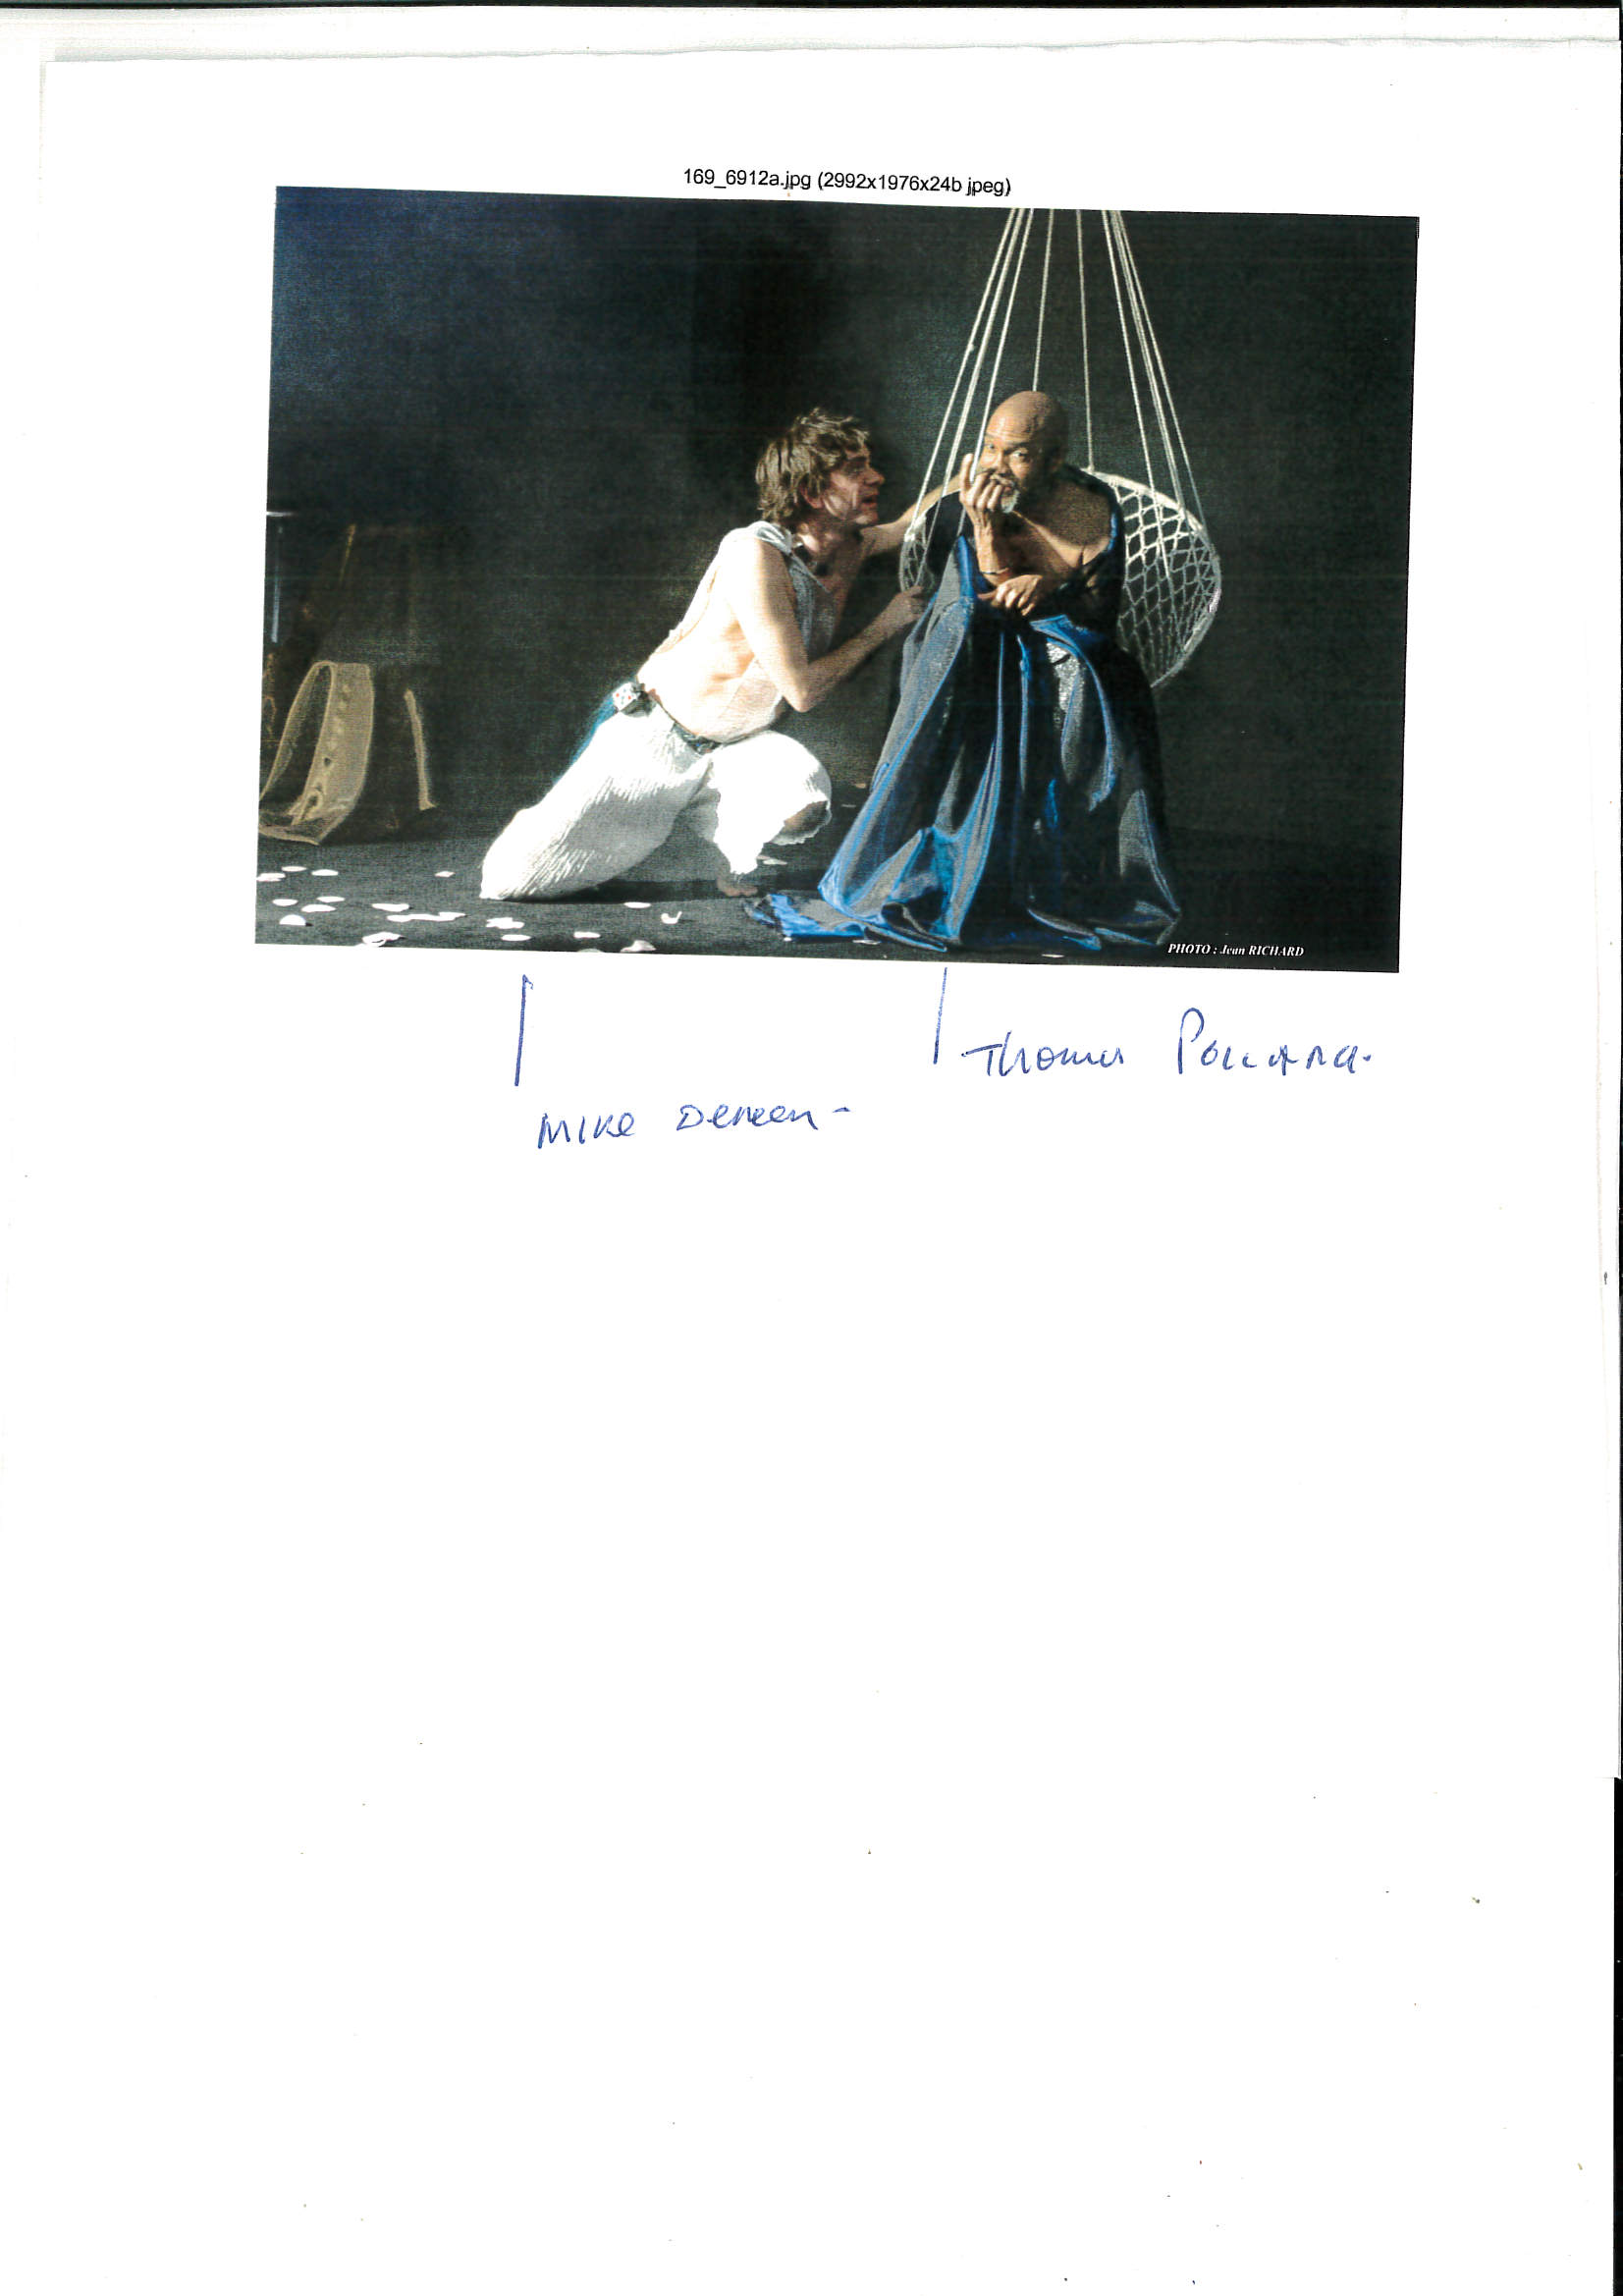 OWAP midsummer night's dream with PUCK and OBERON Kim's show at Comedie francaise paris louvre.jpg